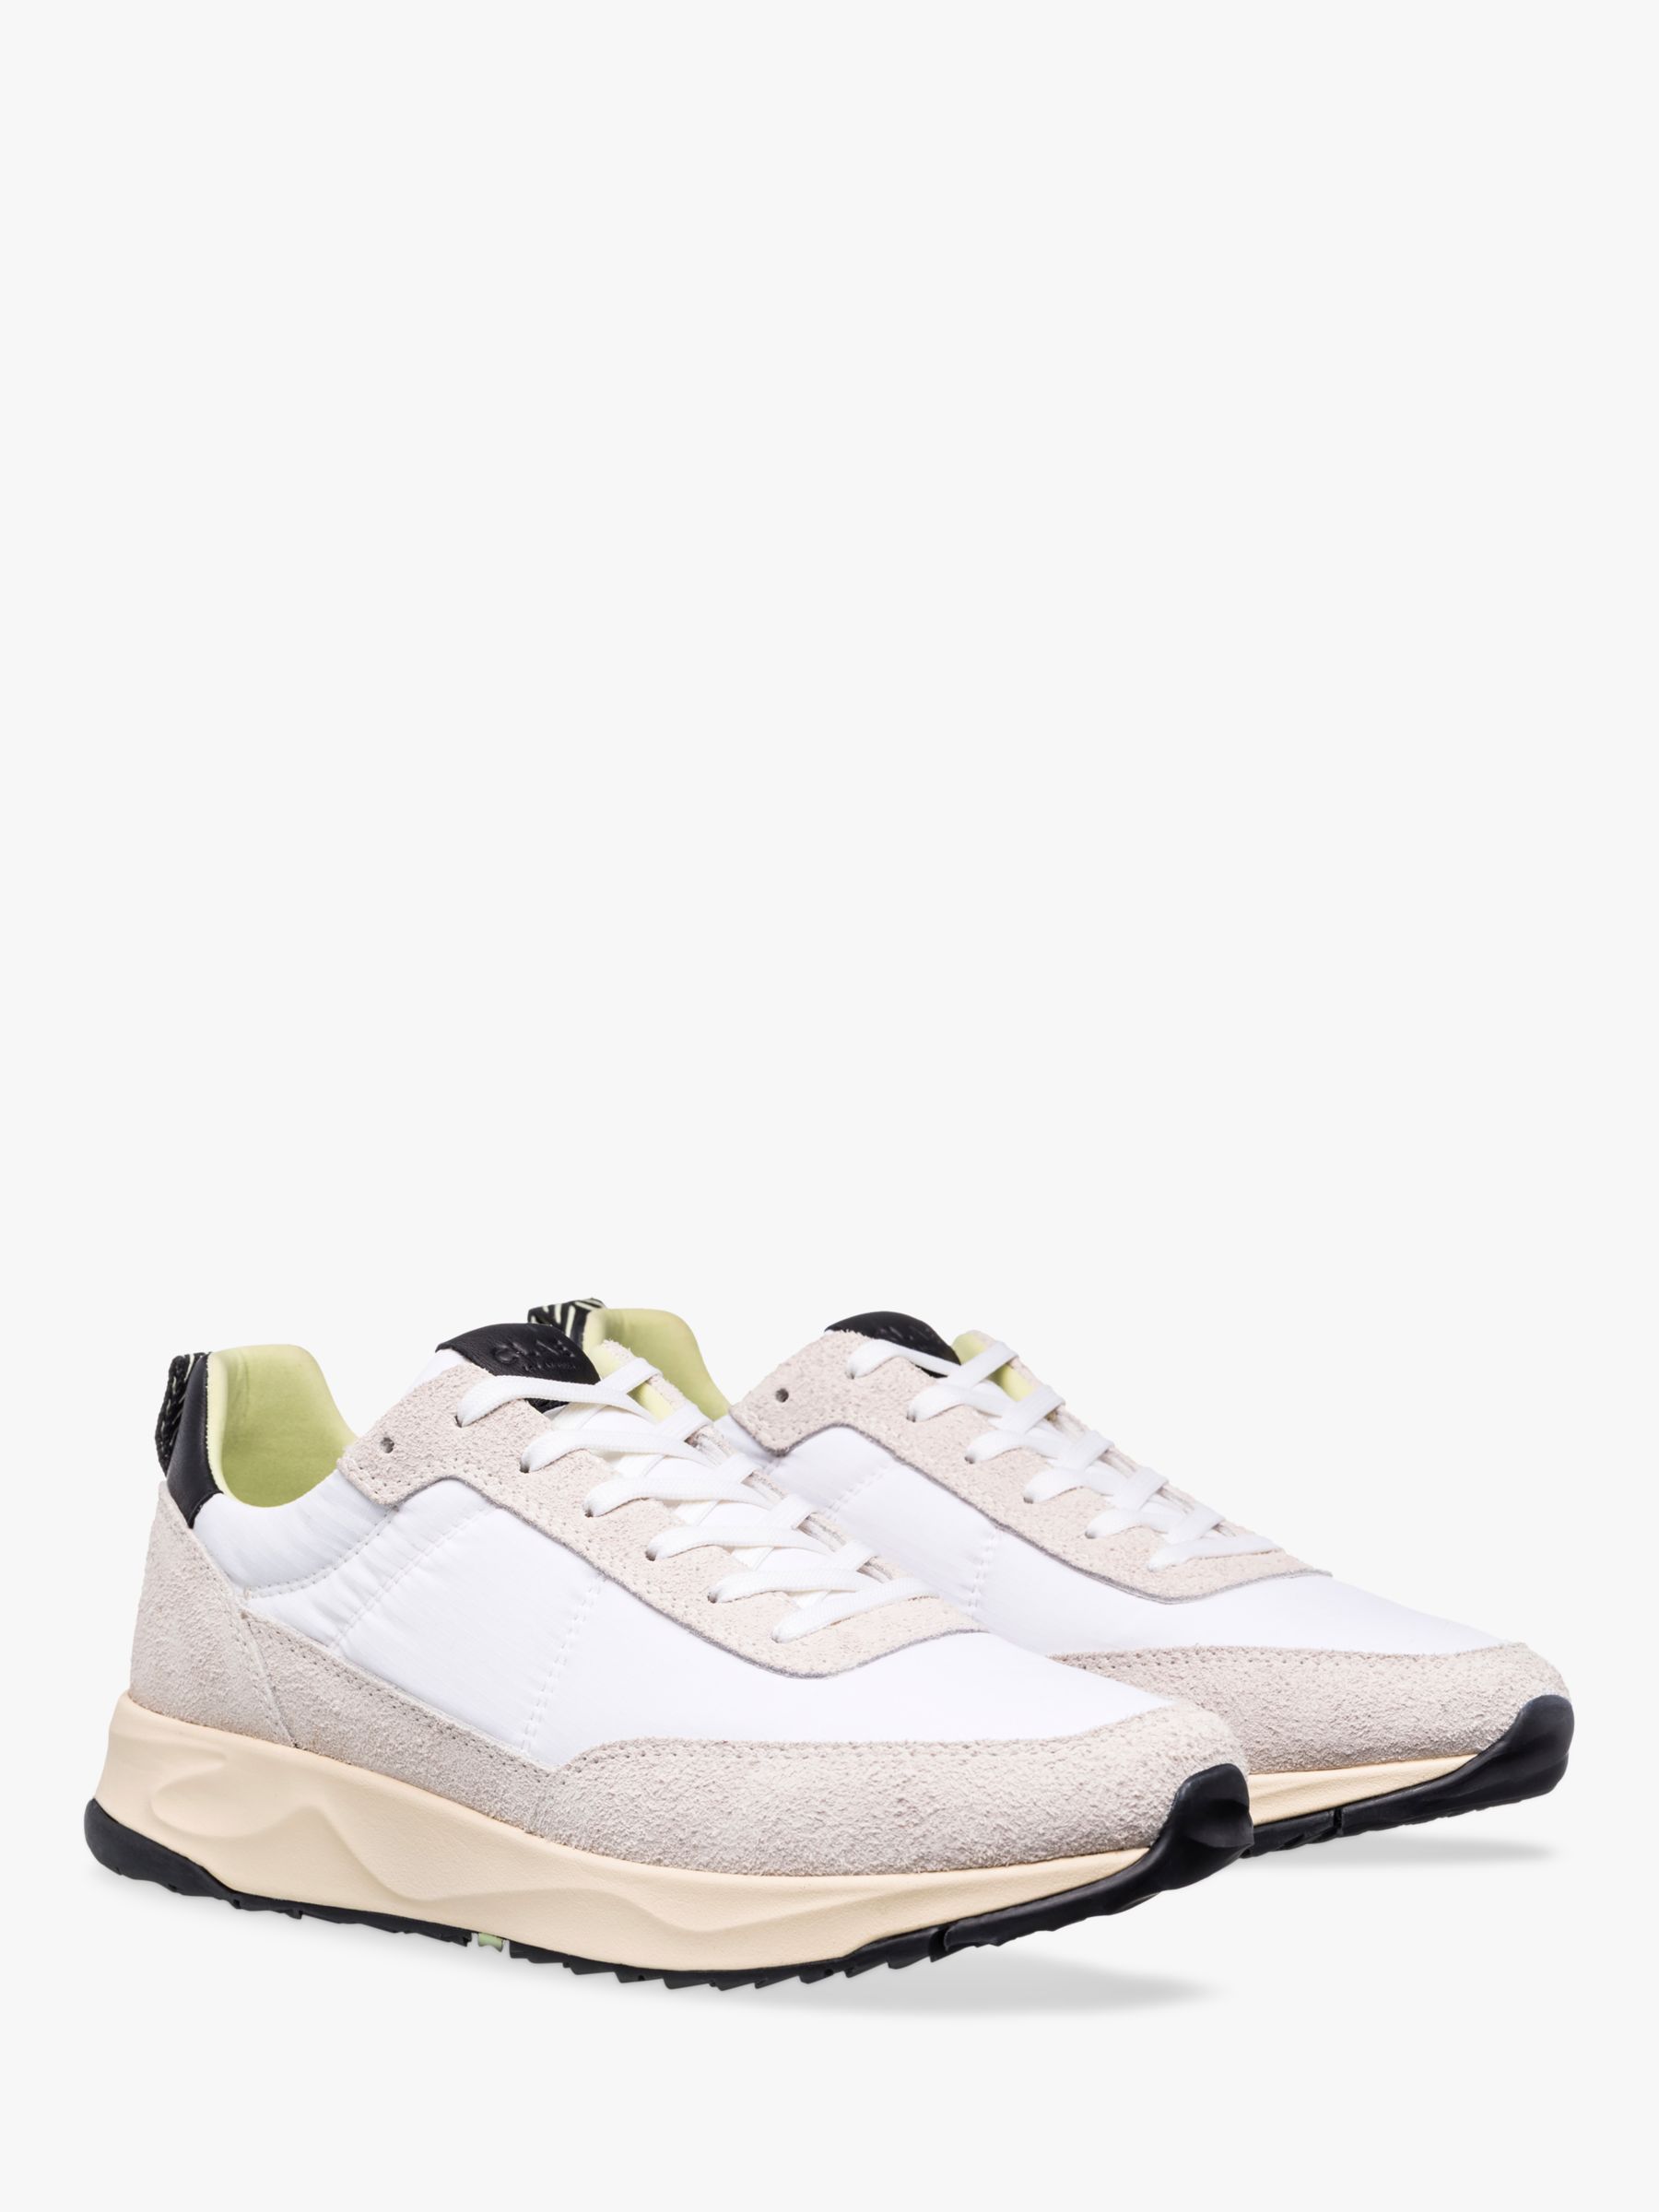 CLAE Owens Suede Lace Up Trainers, White/Black, 8